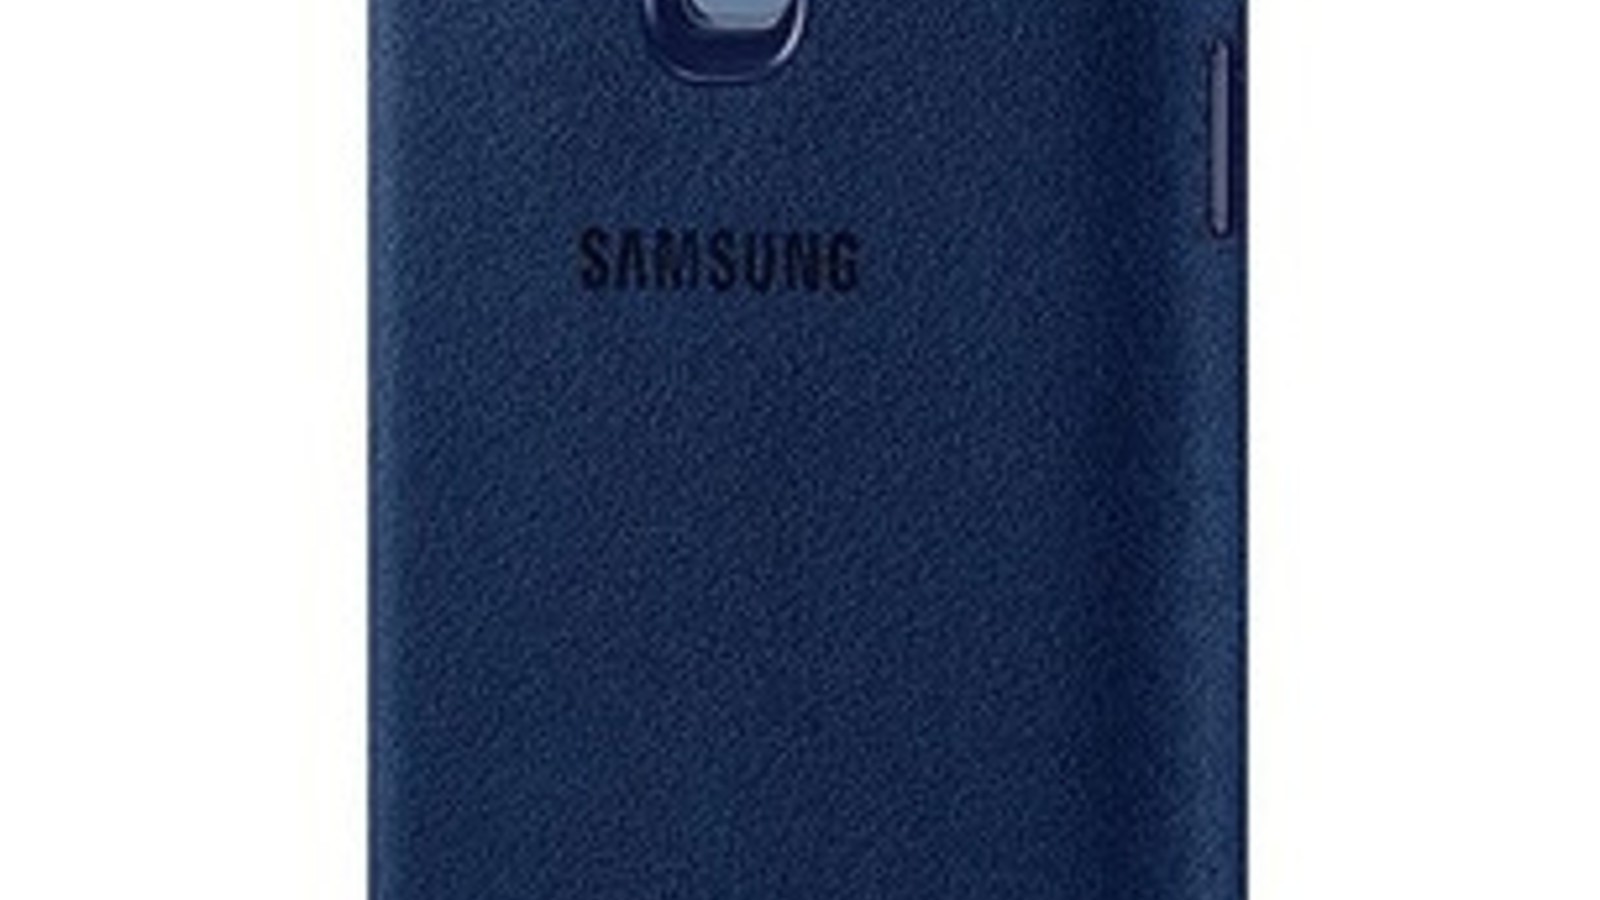 Best Galaxy S9+ Cases in 2019 1